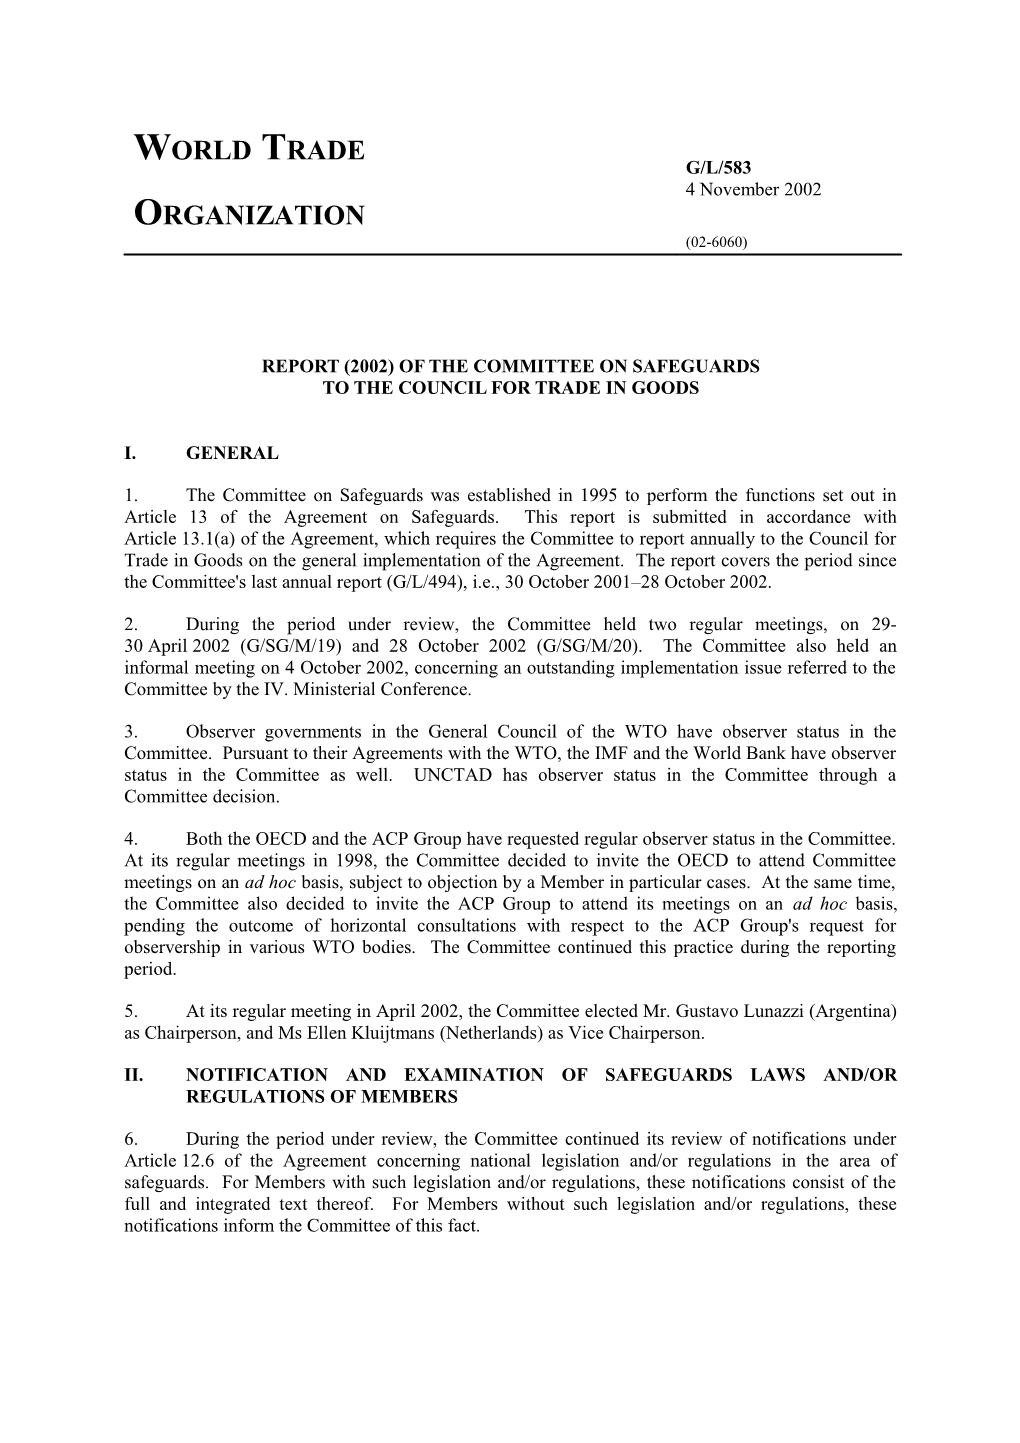 Report (2002) of the Committee on Safeguards